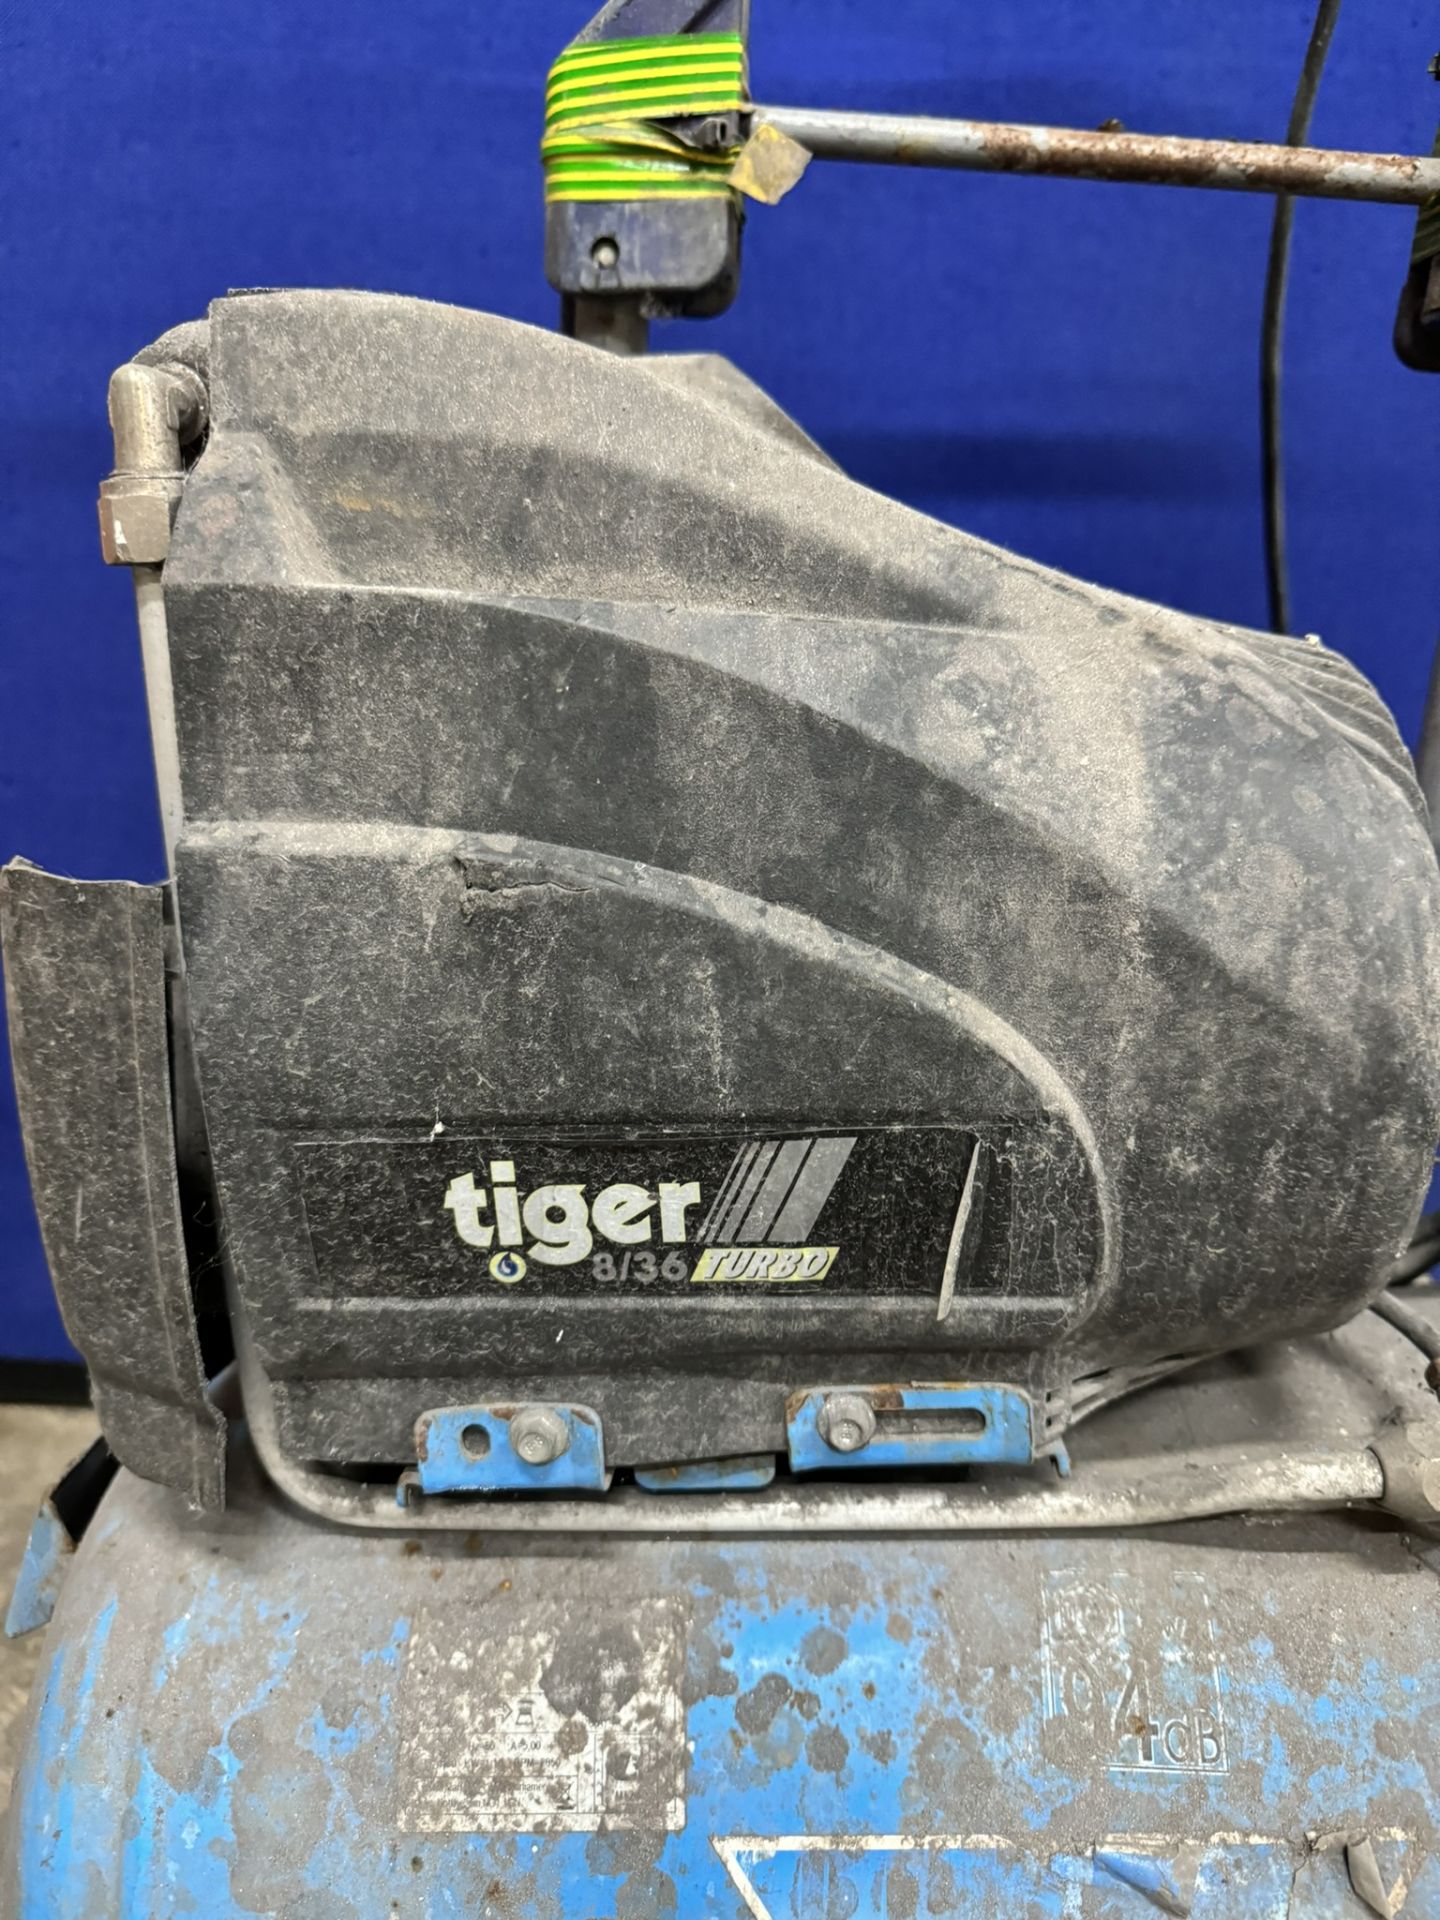 Airmaster Tiger 8/36 Turbo Mobile Air Compressor - Image 3 of 6